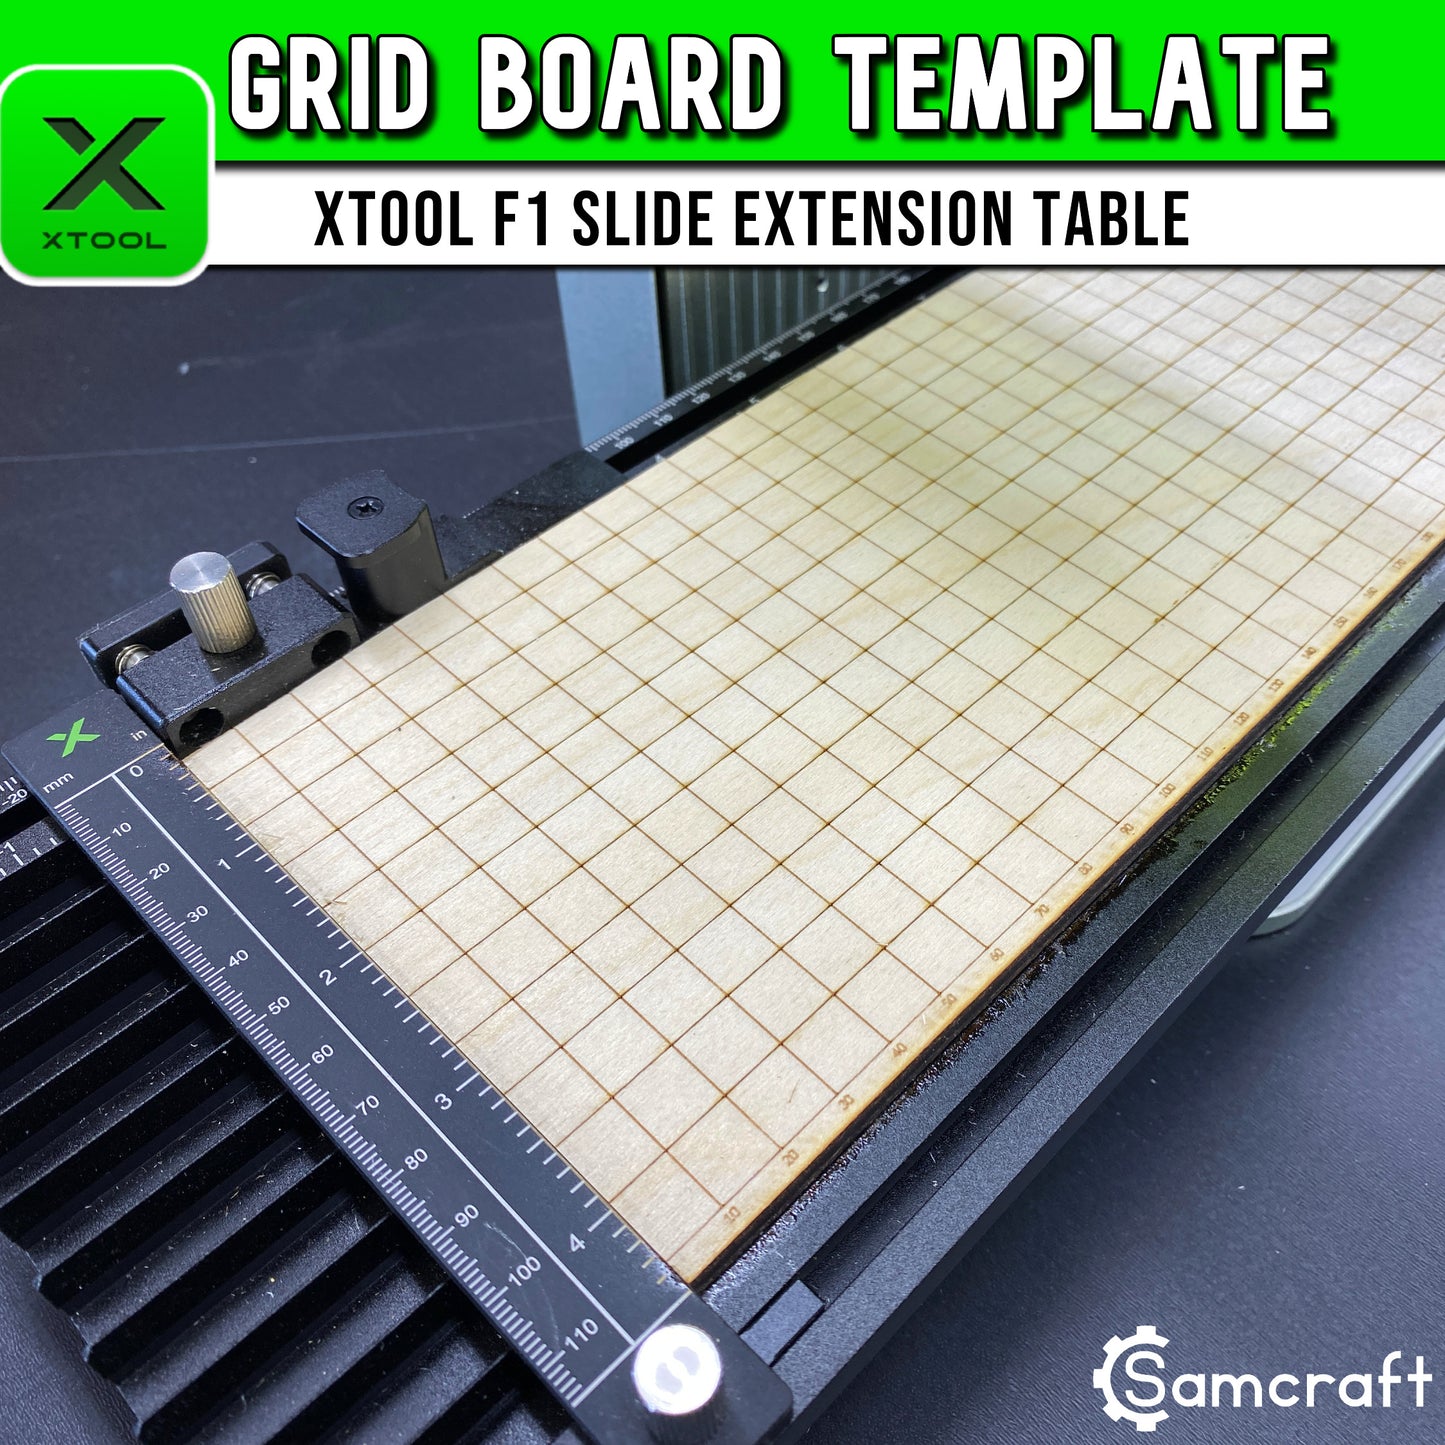 Ultimate Template Kit - xTool F1 Slide Extension